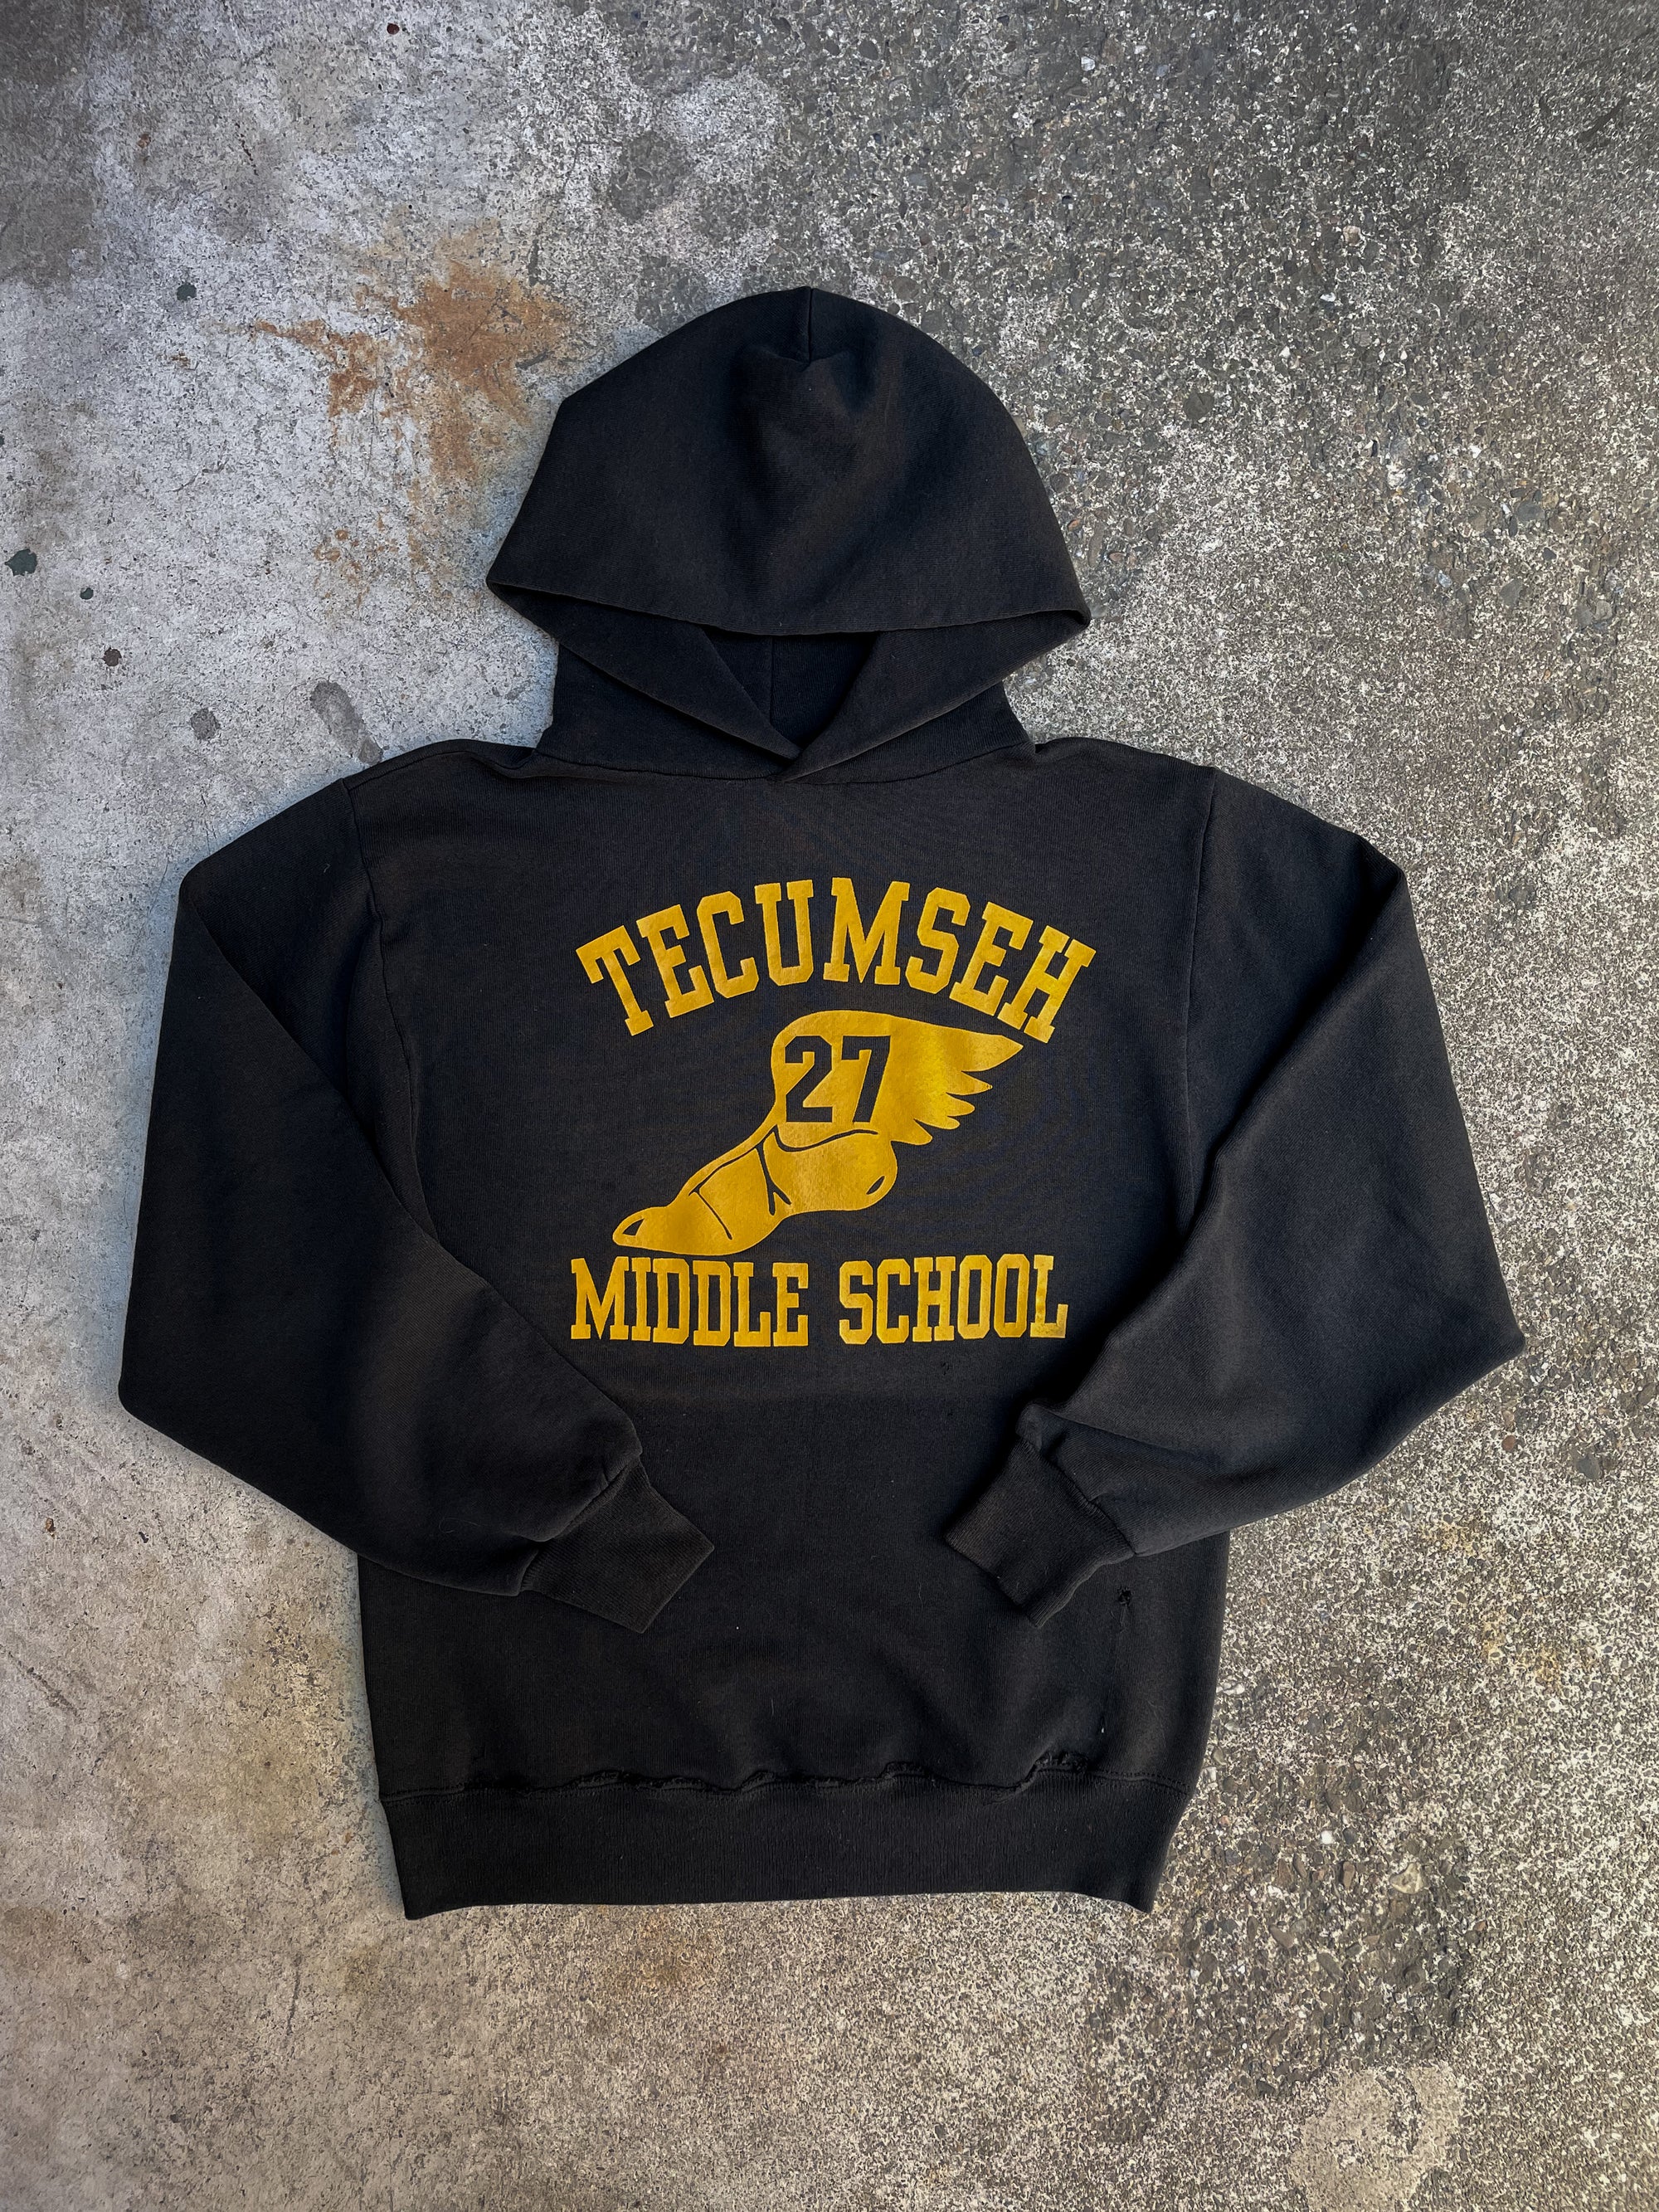 1980s Faded Black “Tecumseh Middle School” Removed Pocket Hoodie (XS/S)